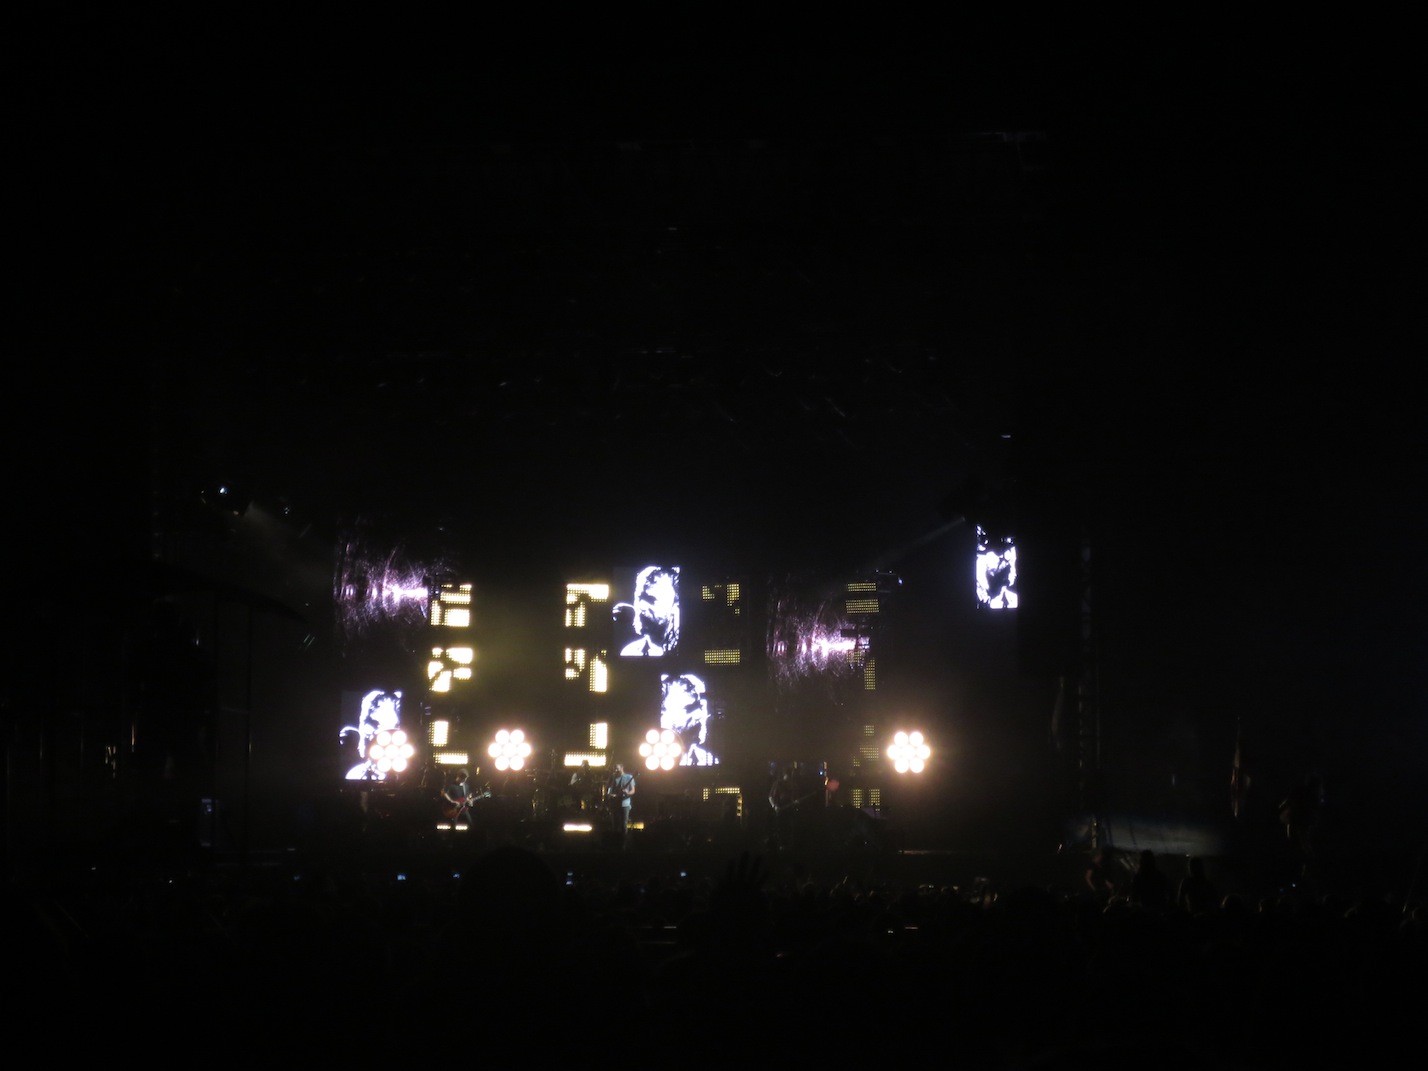 Kings of Leon playing the last set of the day.